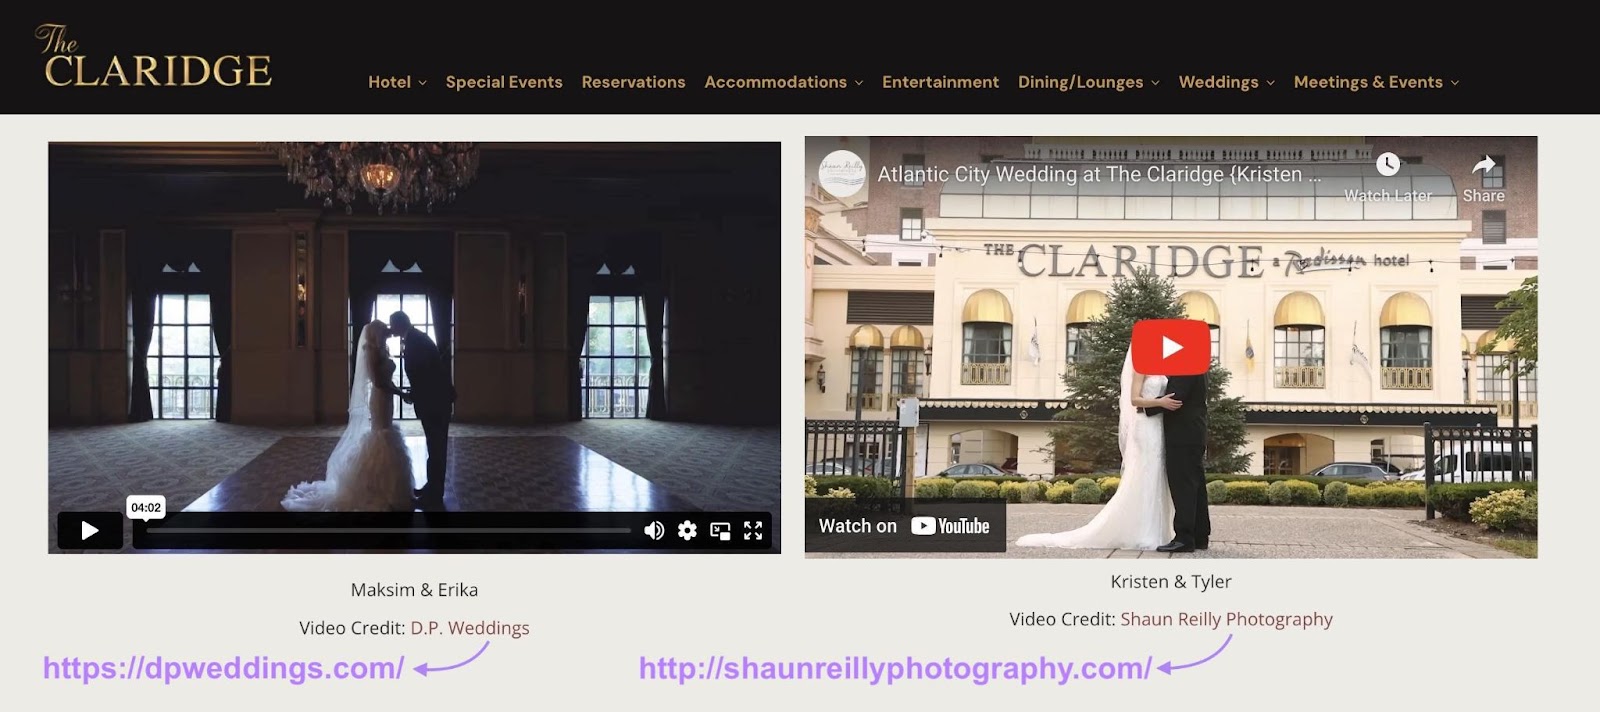 video credits shown connected  The Claridge Hotel page